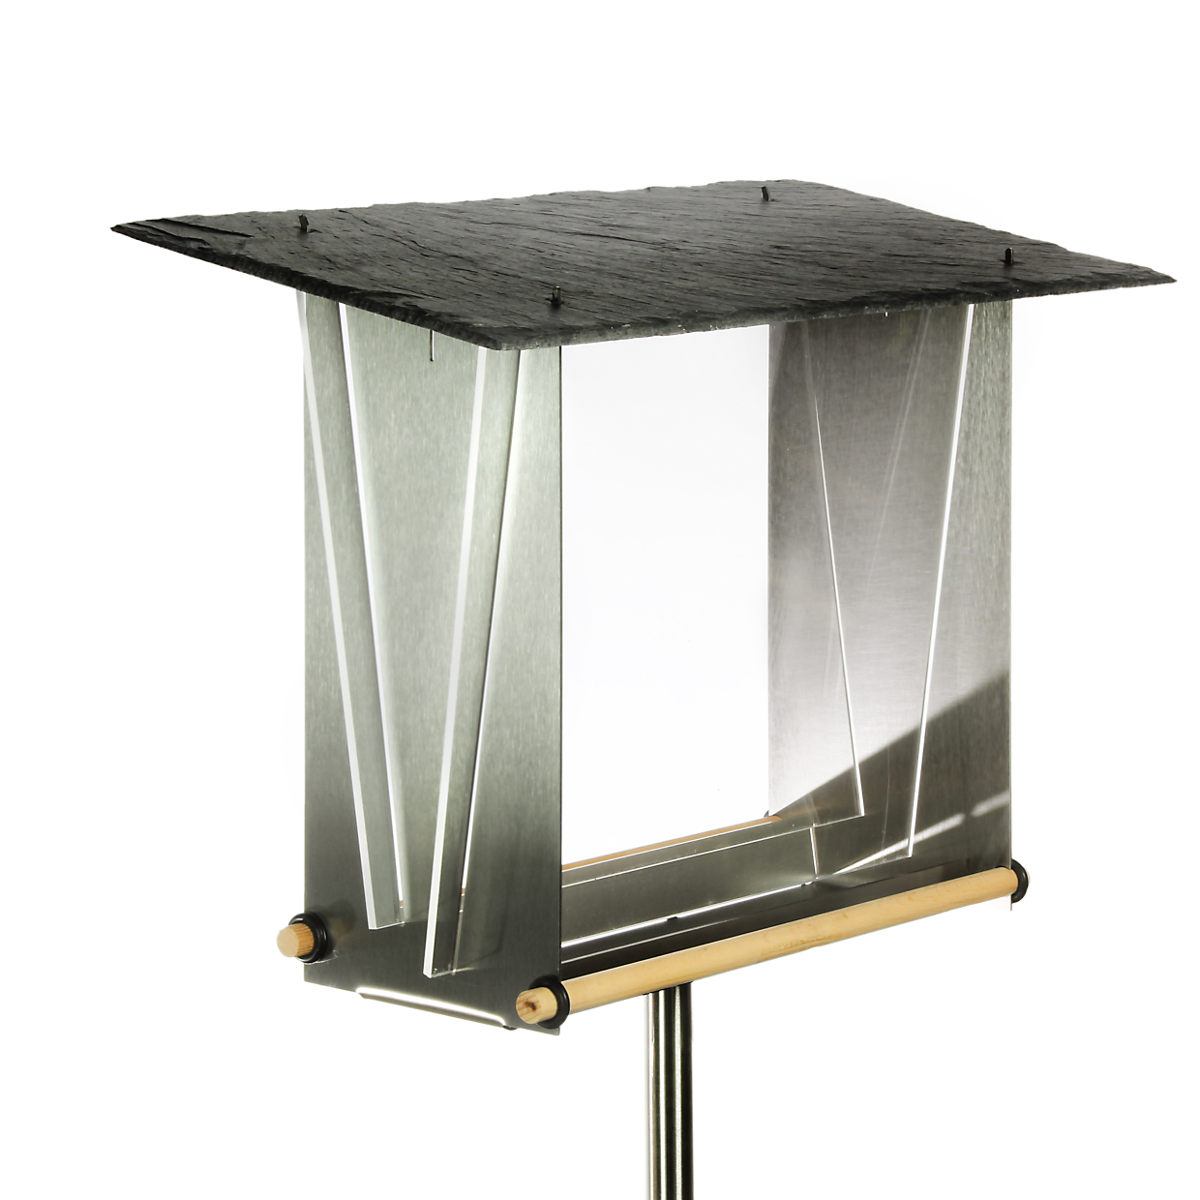 Transparent Birdhouse made of stainless steel, slate, wood & acrylic glass (square)